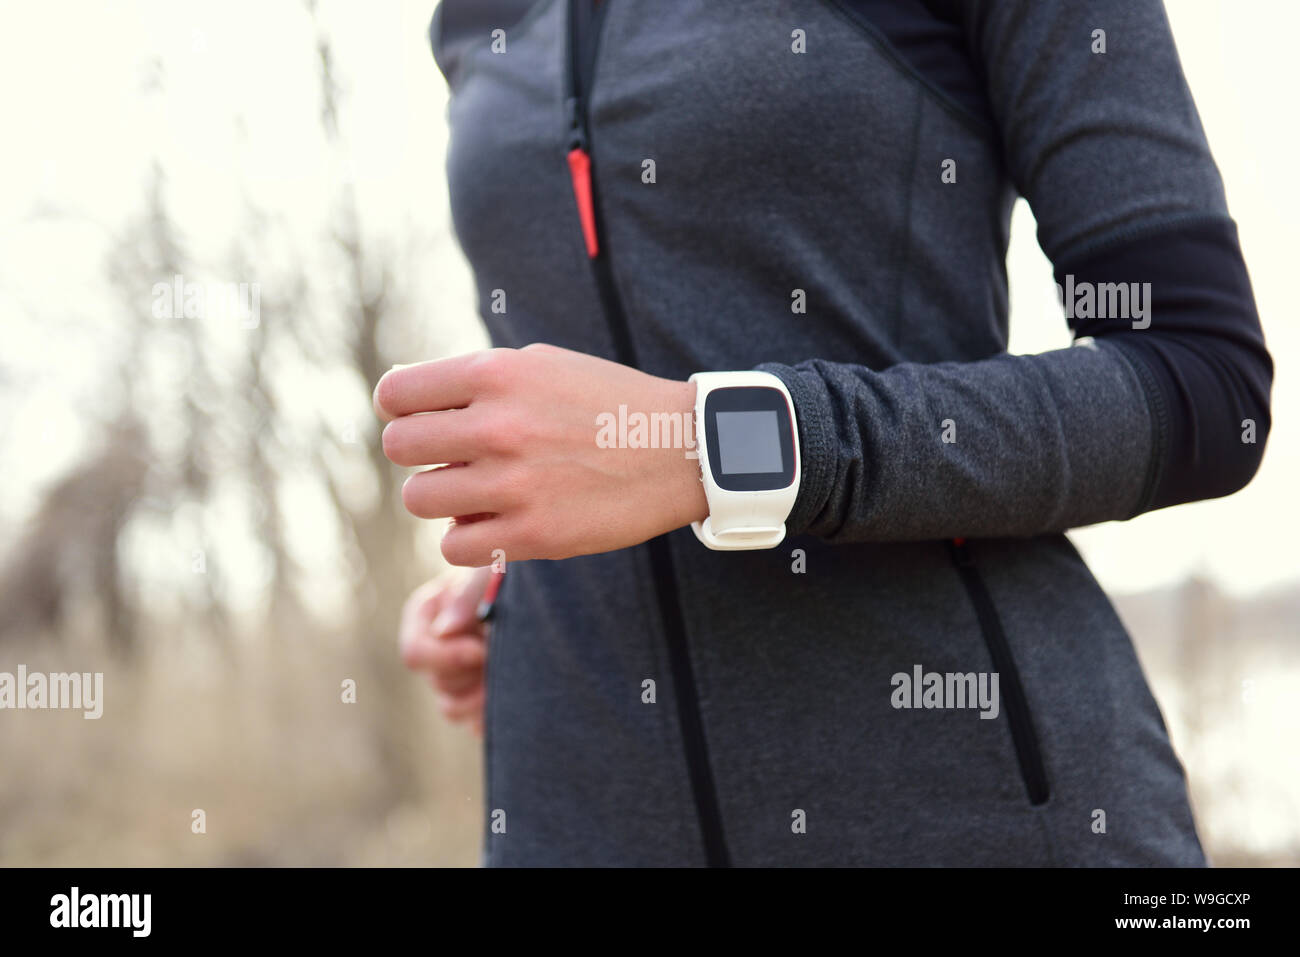 Smartwatch woman running with heart rate monitor. Closeup of female wrist wearing smart sport watch as activity tracker outdoors during cardio workout. Stock Photo